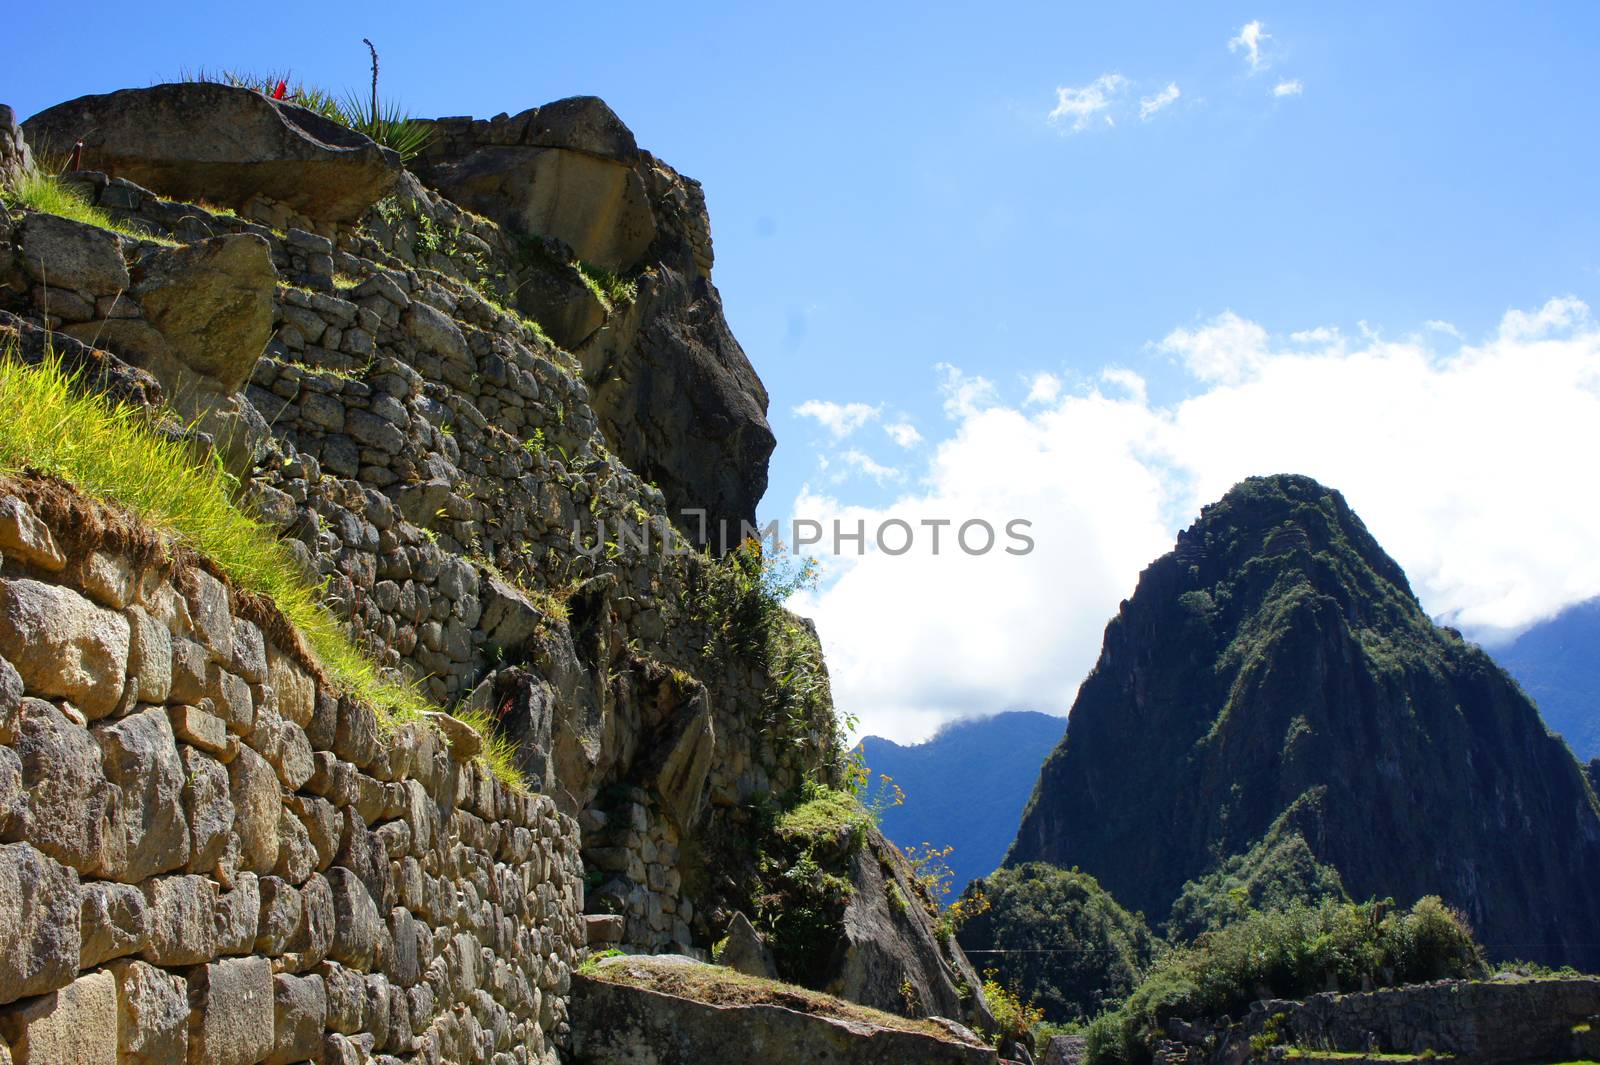 Machu Picchu, site of the ruins of the Incan citadel high in the Andes Mountains in Peru